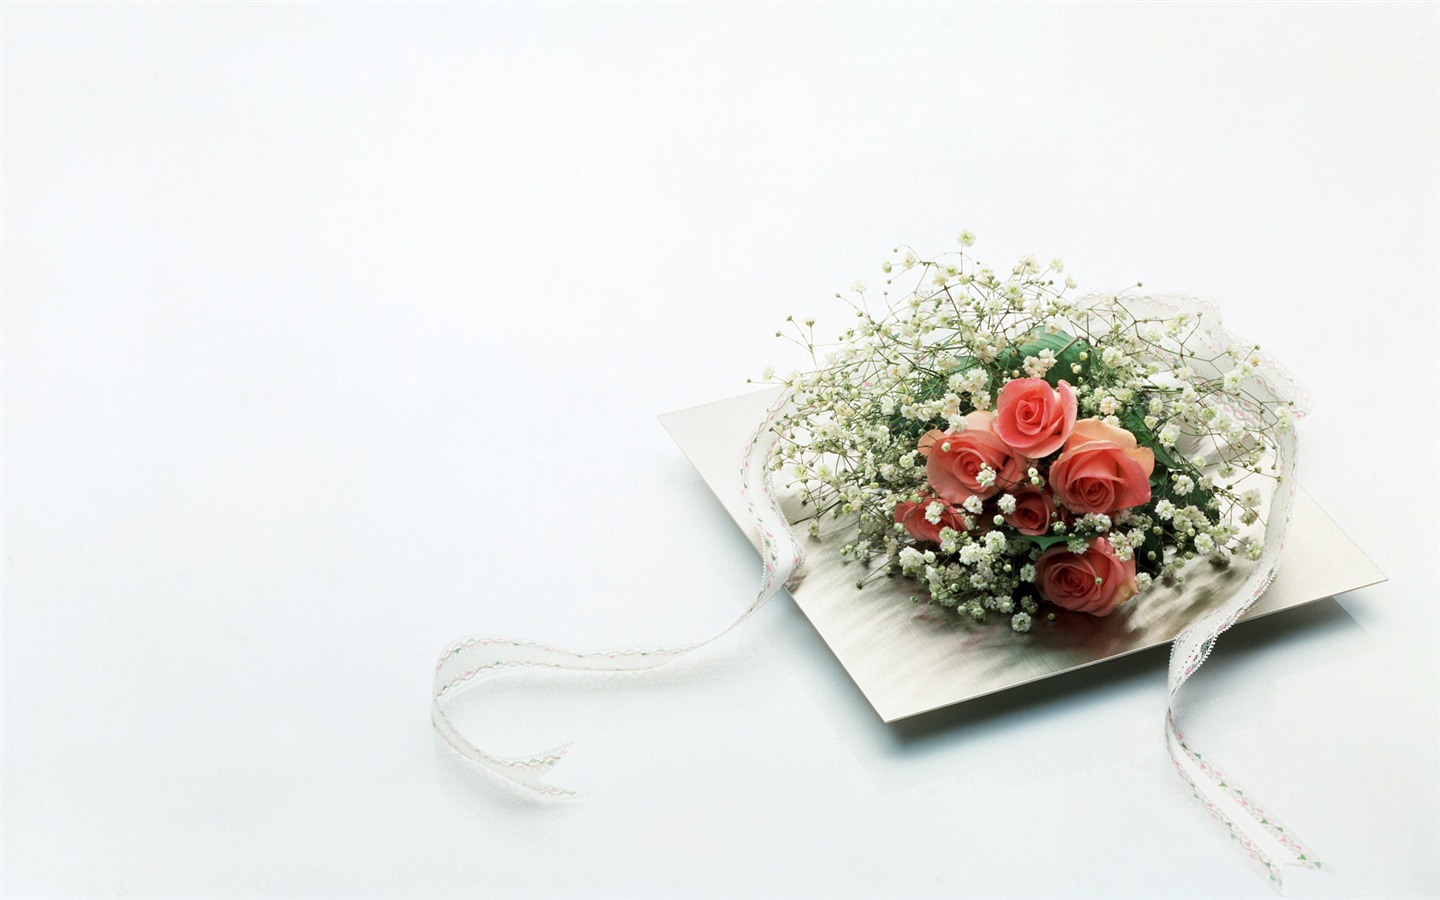 Wedding Flowers items wallpapers (2) #3 - 1440x900